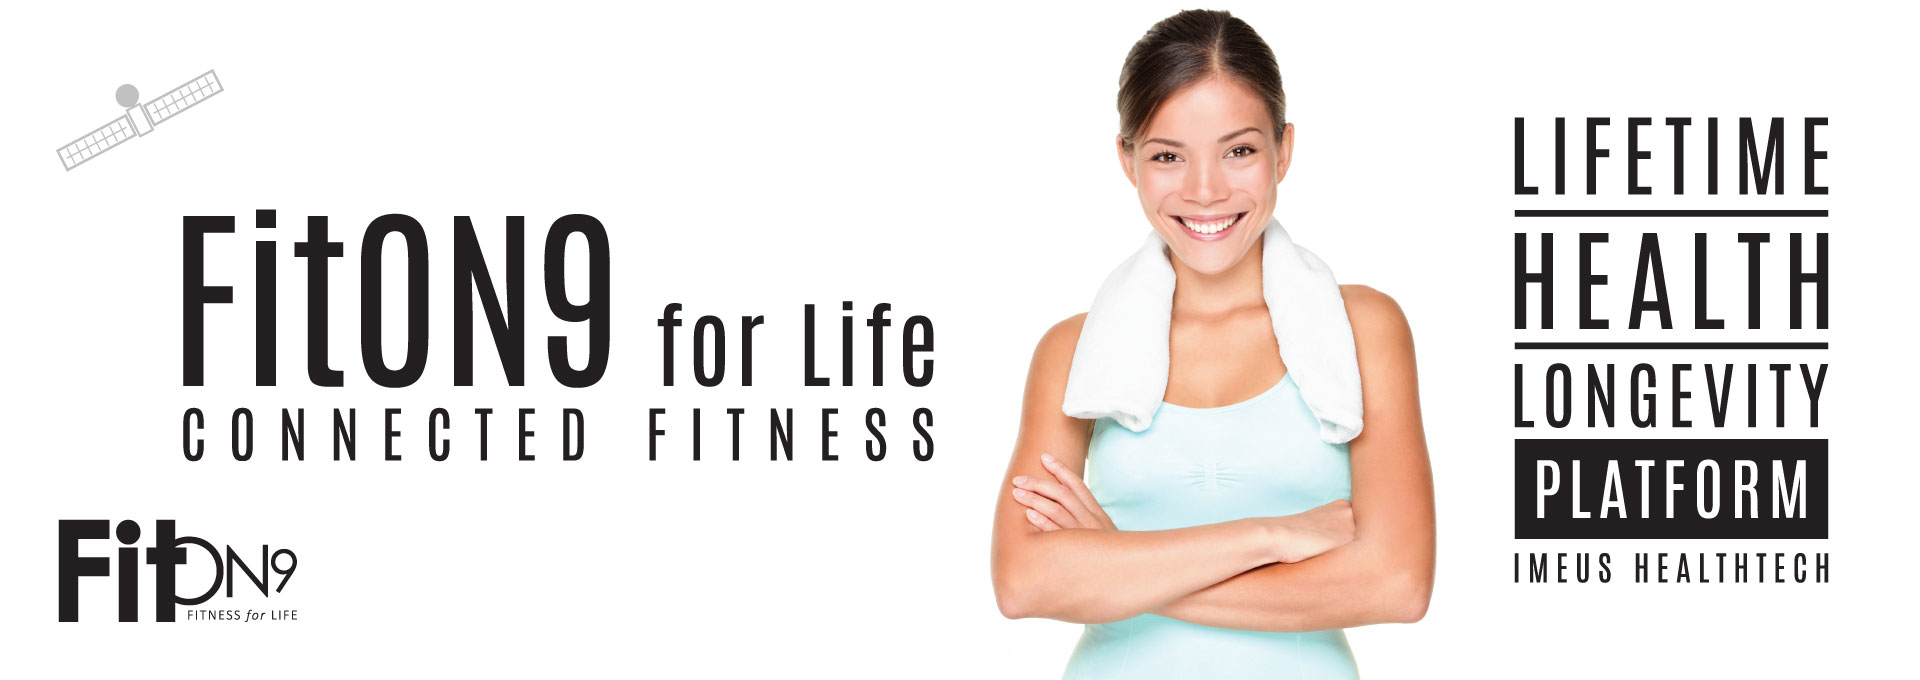 FitON9 Fit for Life